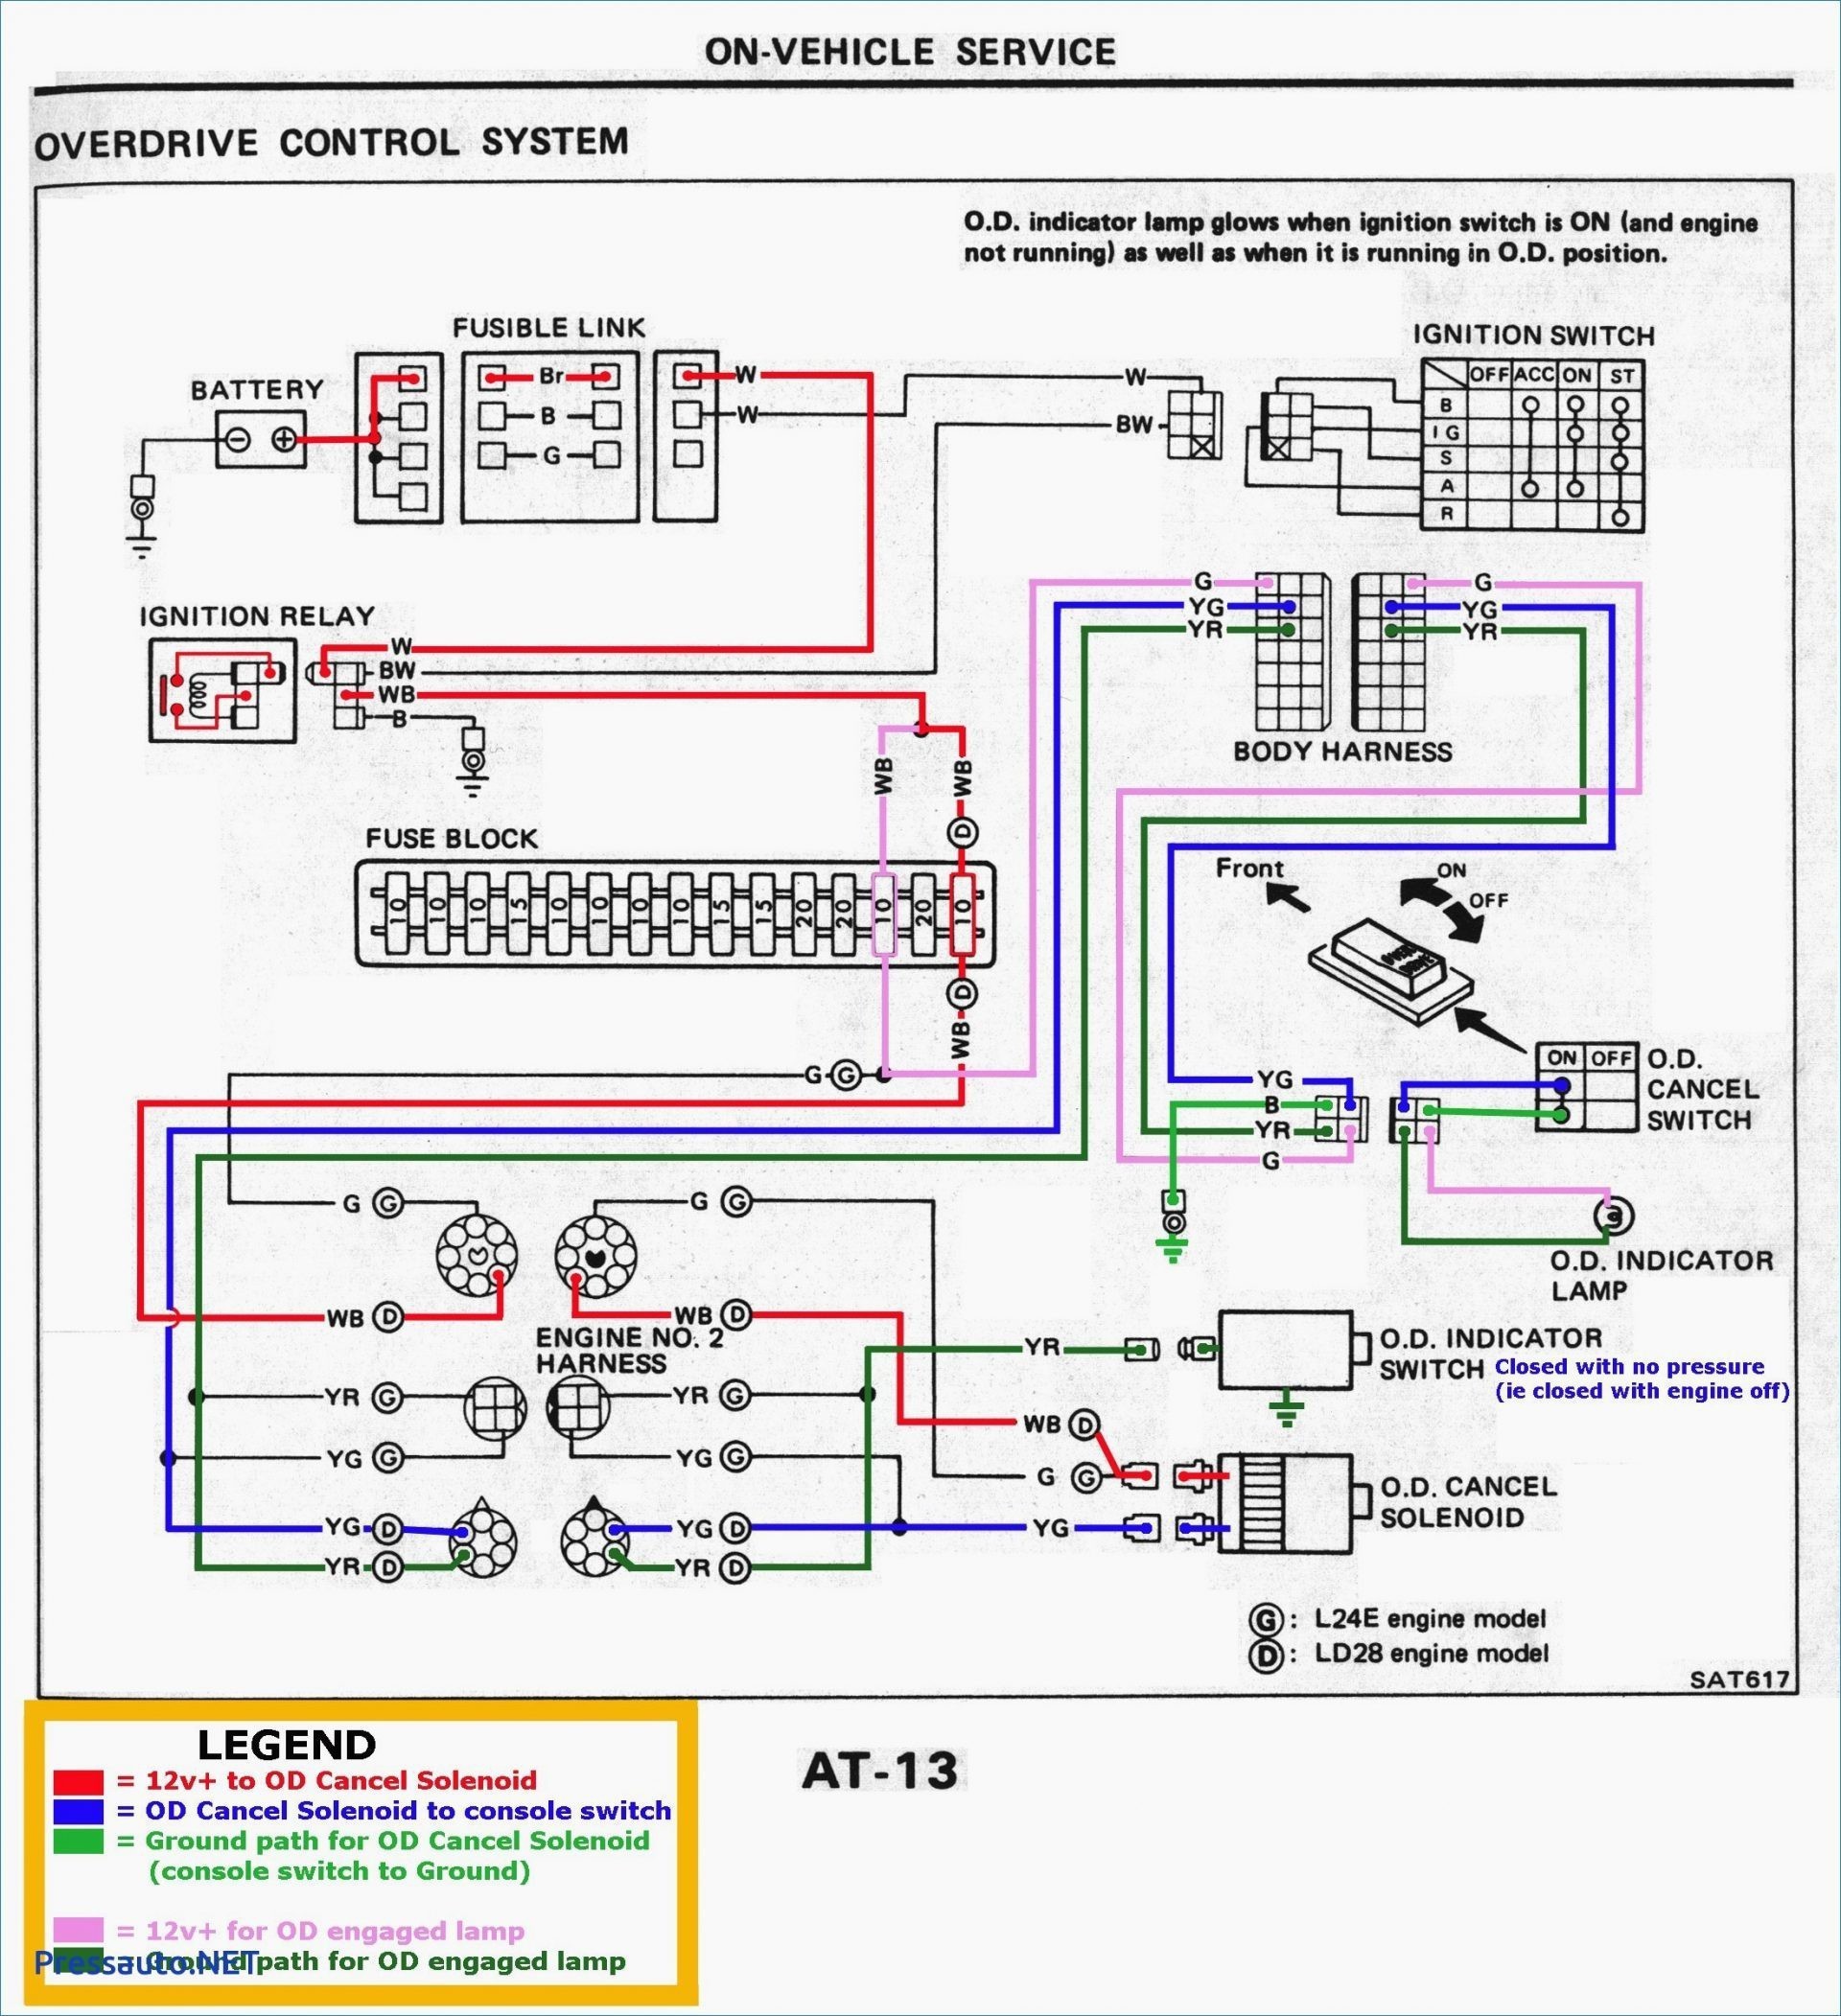 Utility Trailer Wiring Diagram Rate House Trailer Wiring Diagram Save Wiring Diagram For Boat Trailer